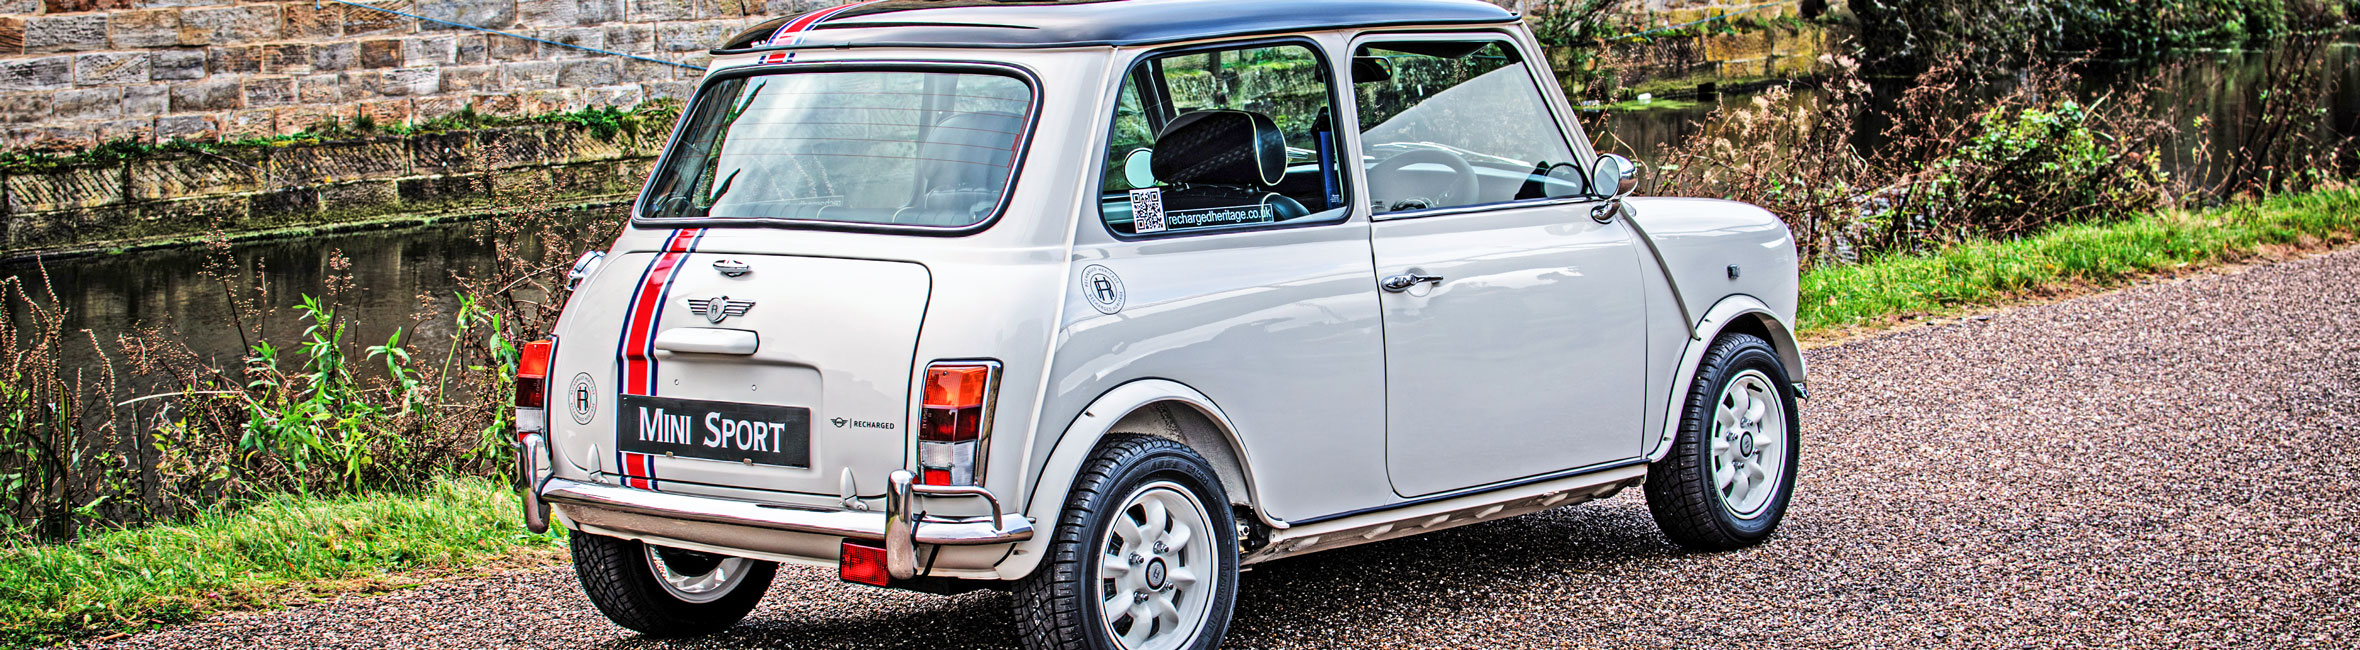 Rear of 'Merlin' a converted Classic Mini painted in Old English White with a Black roof. 